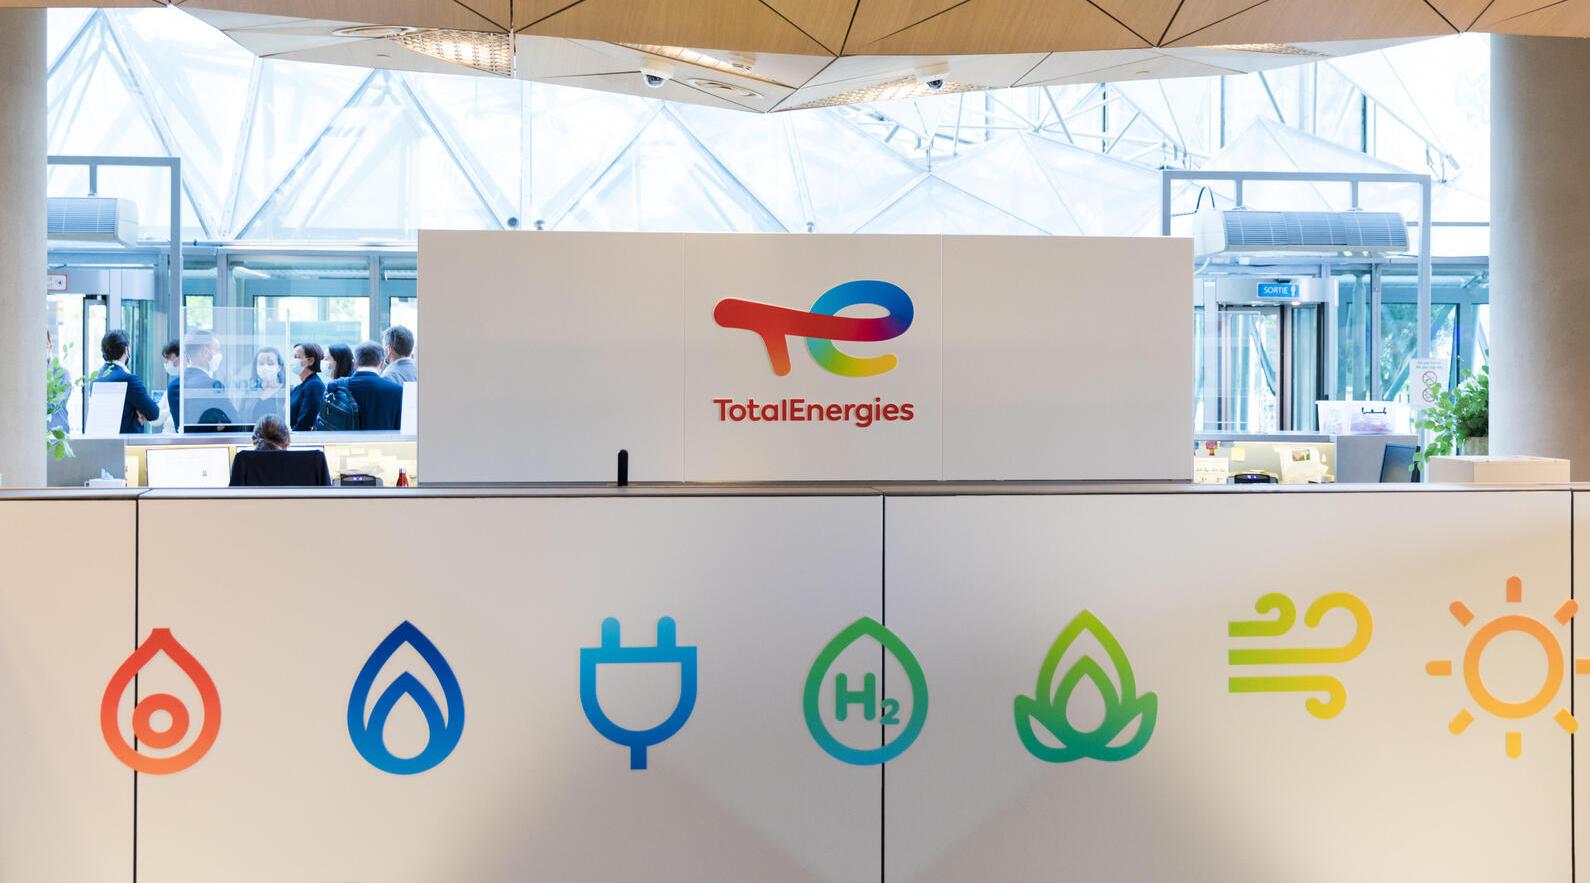 TotalEnergies, a Broad Energy Company